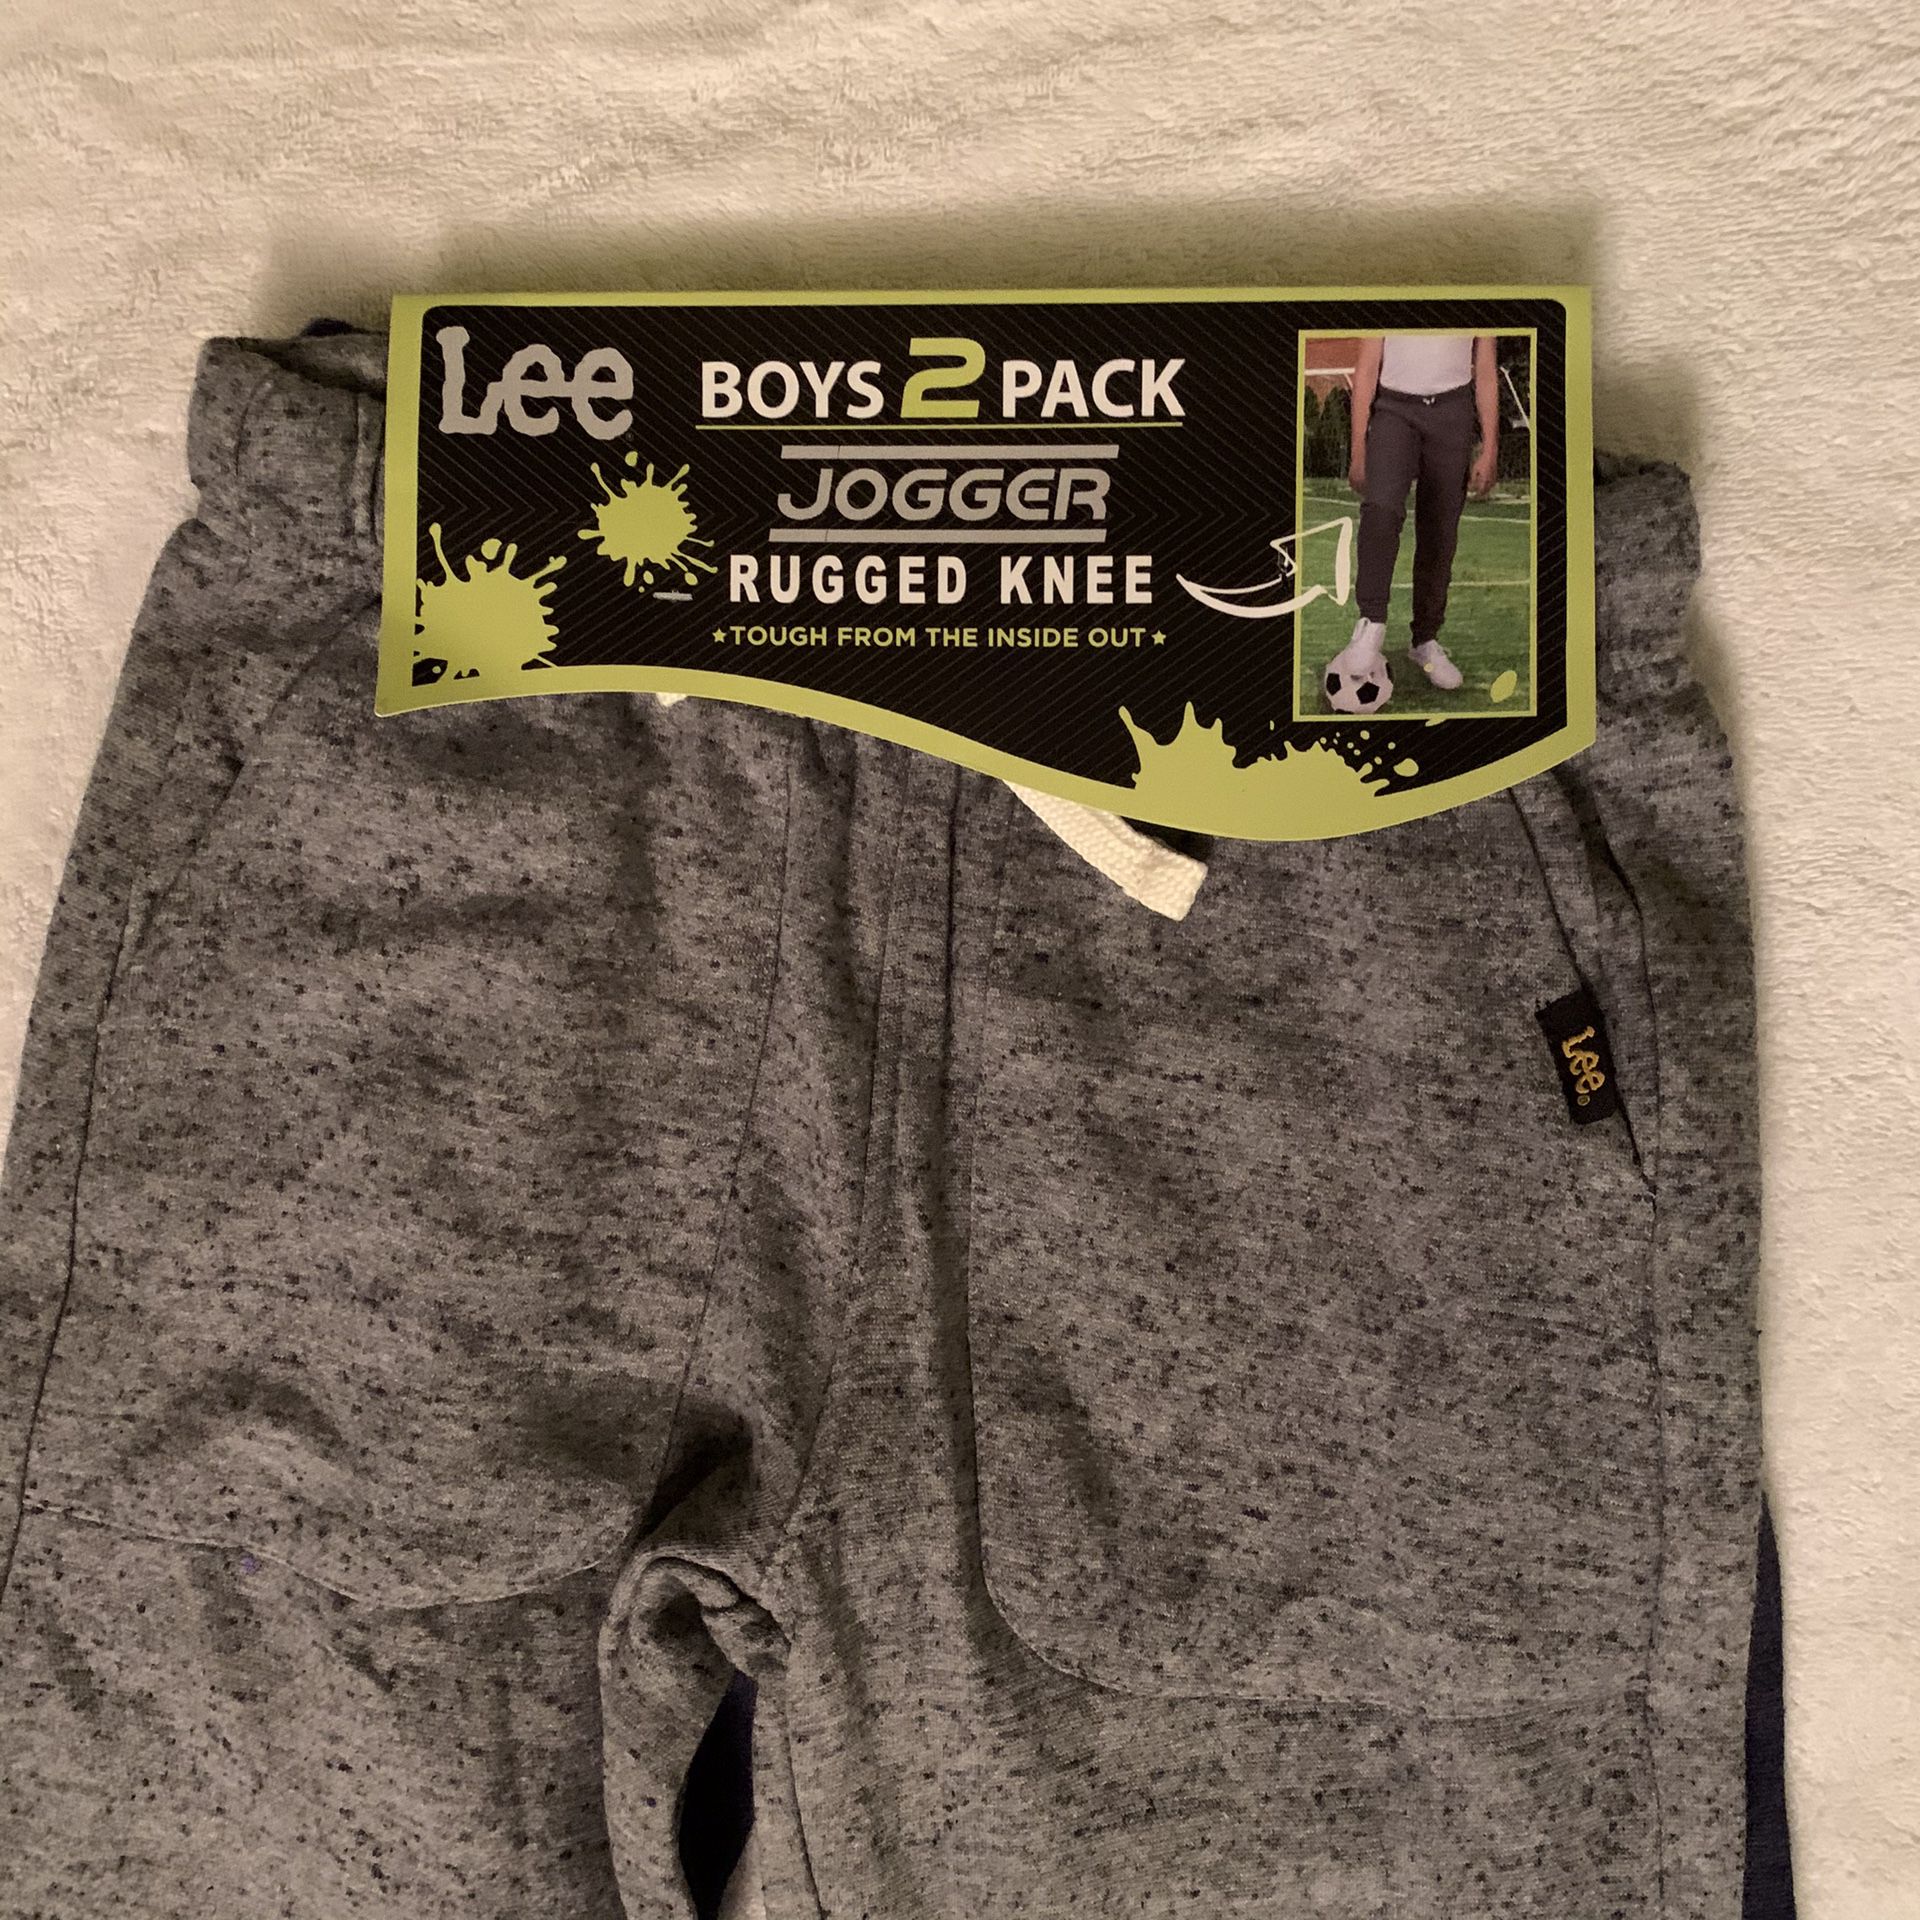 LEE YOUTH BOY’S 2-PACK JOGGER RUGGED KNEE PANTS. SIZE S -7-8